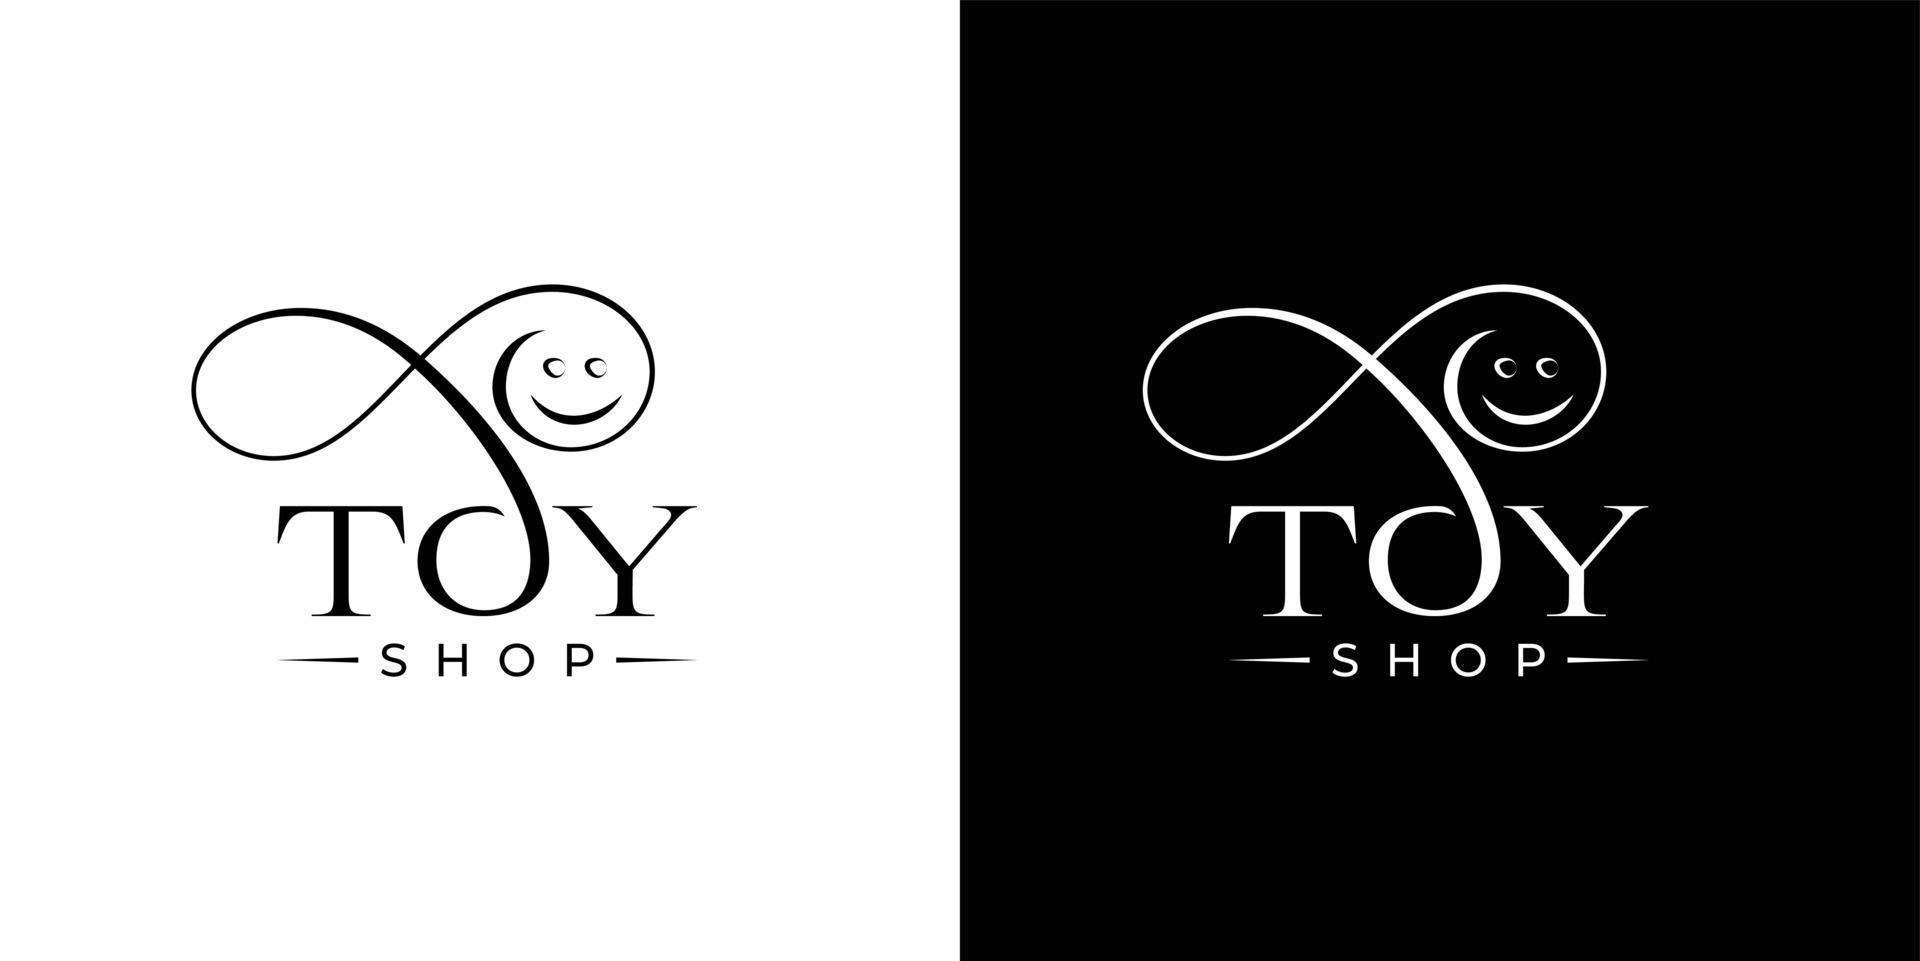 Abstract Toy Shop with smile face emoji logo design, toy shop name, cute smile face vector logo design